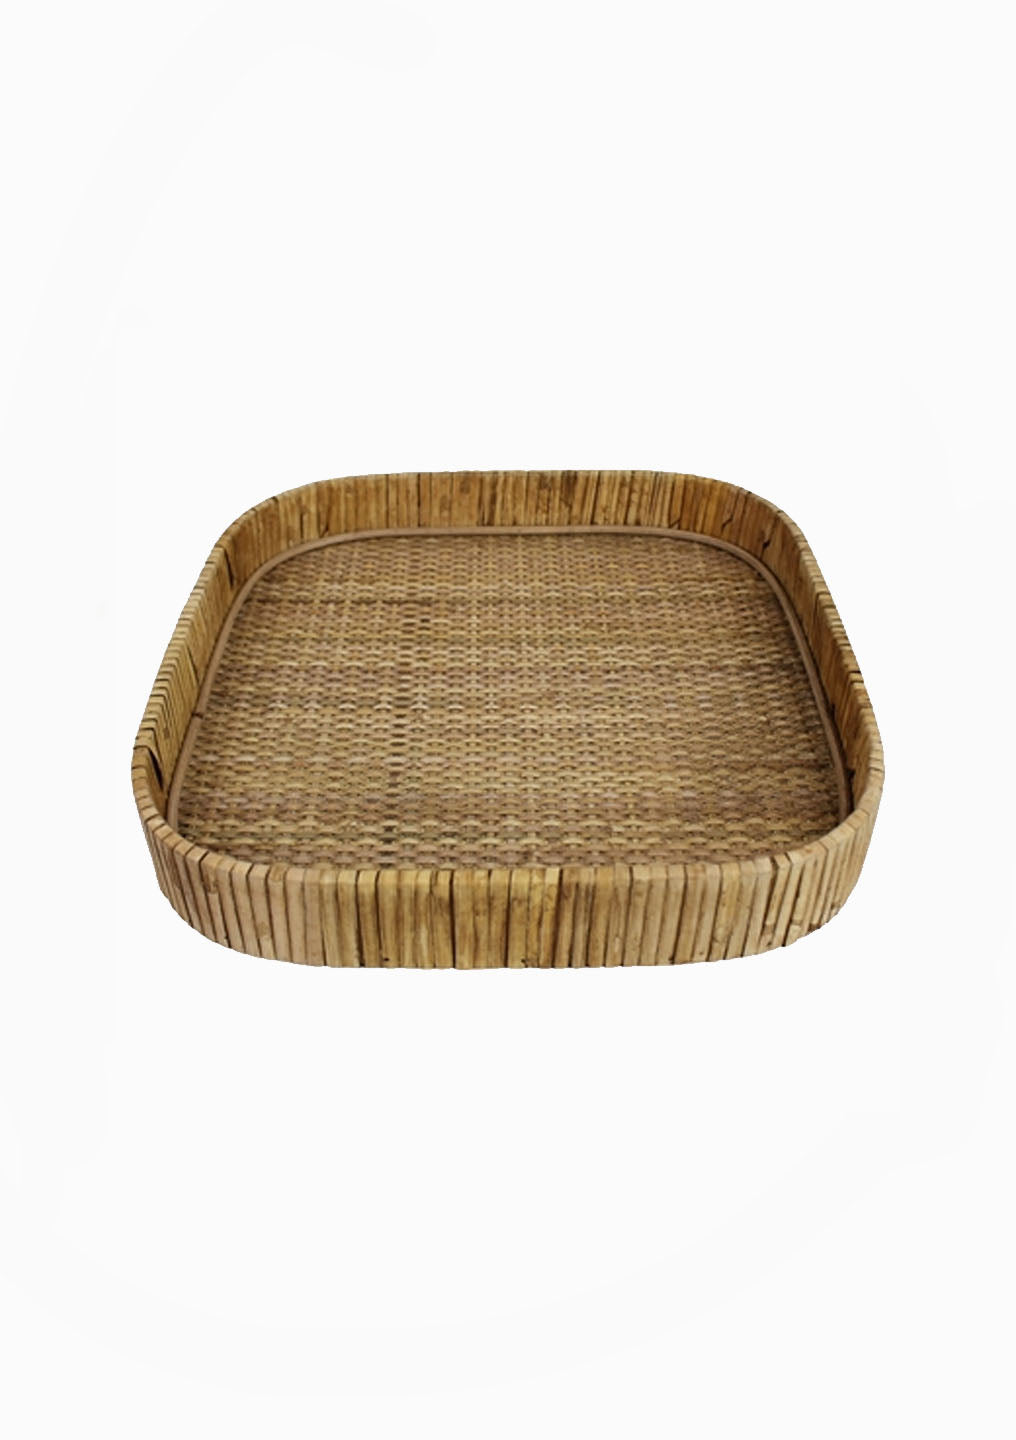 Square Rattan Cayman Tray | Large